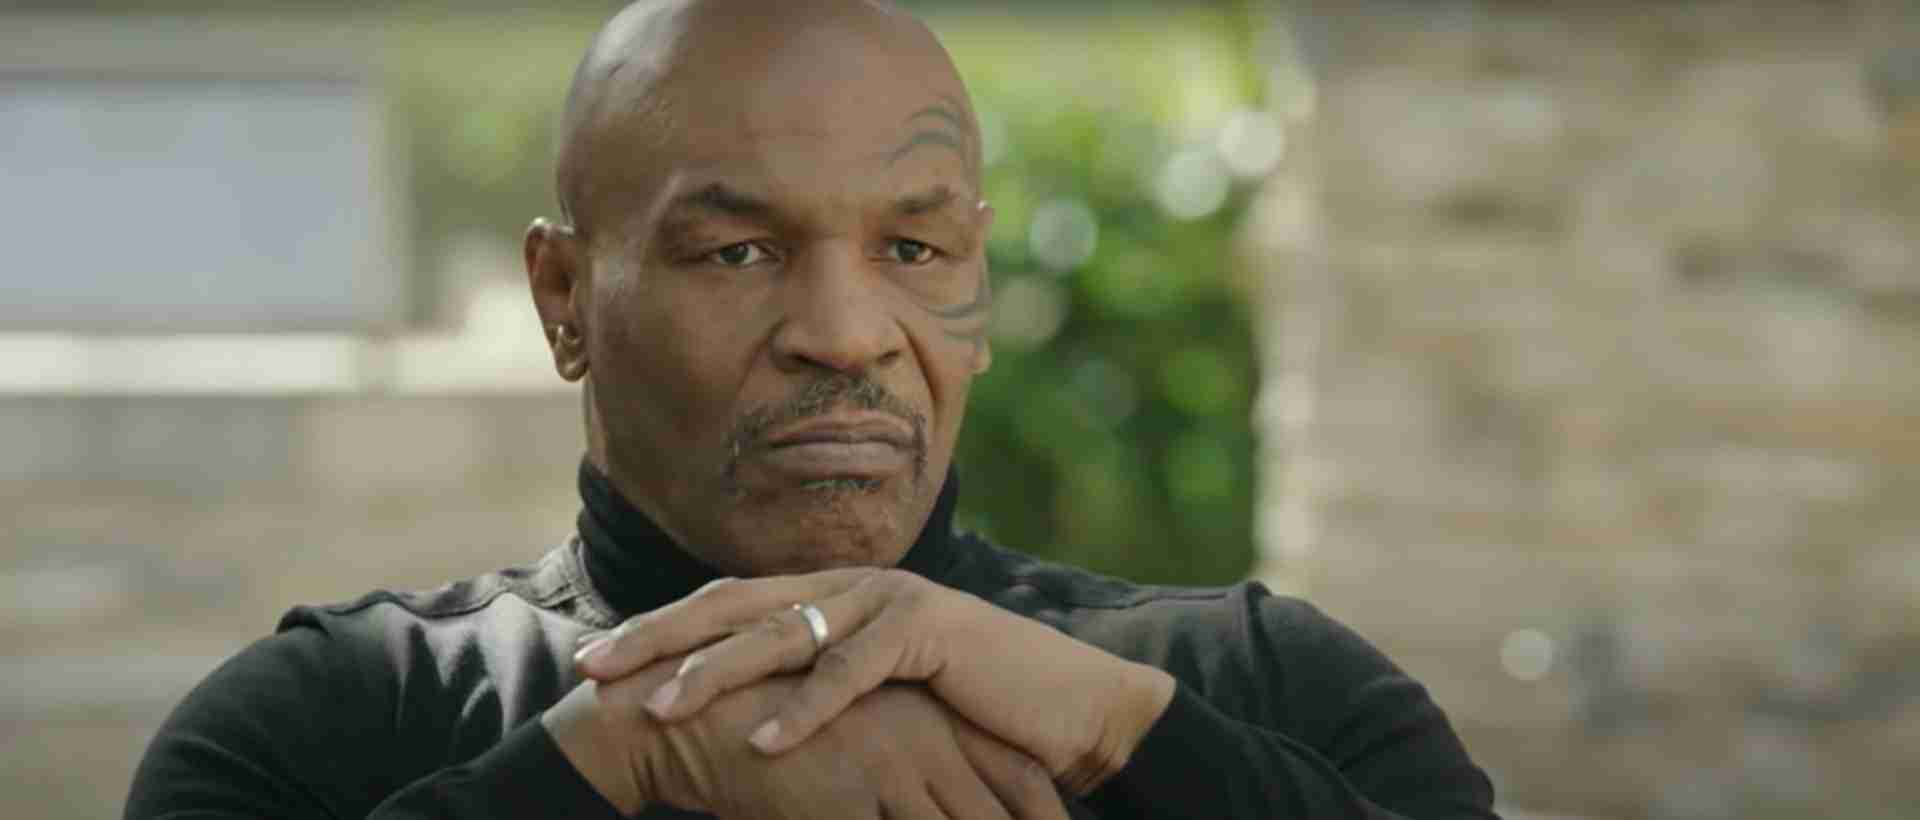 Mike Tyson reveals his mentality in his prime